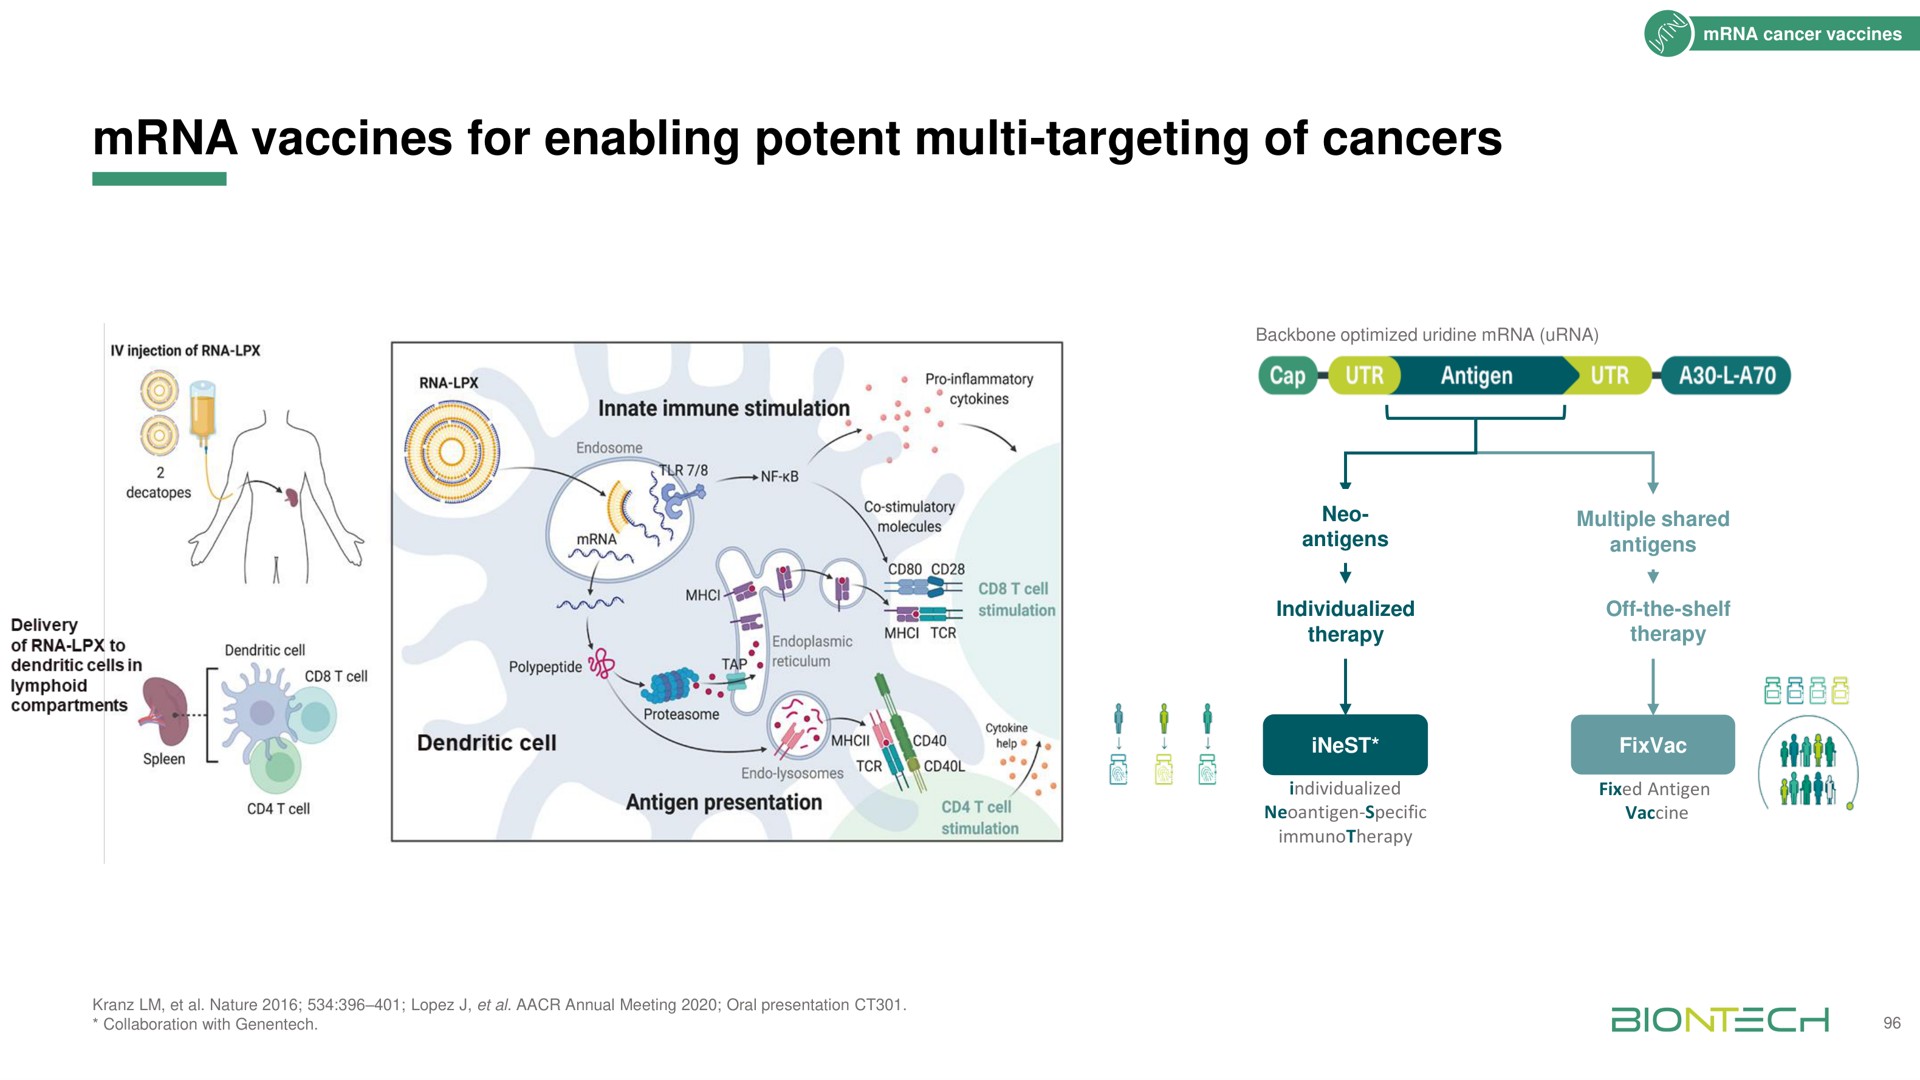 vaccines for enabling potent targeting of cancers | BioNTech